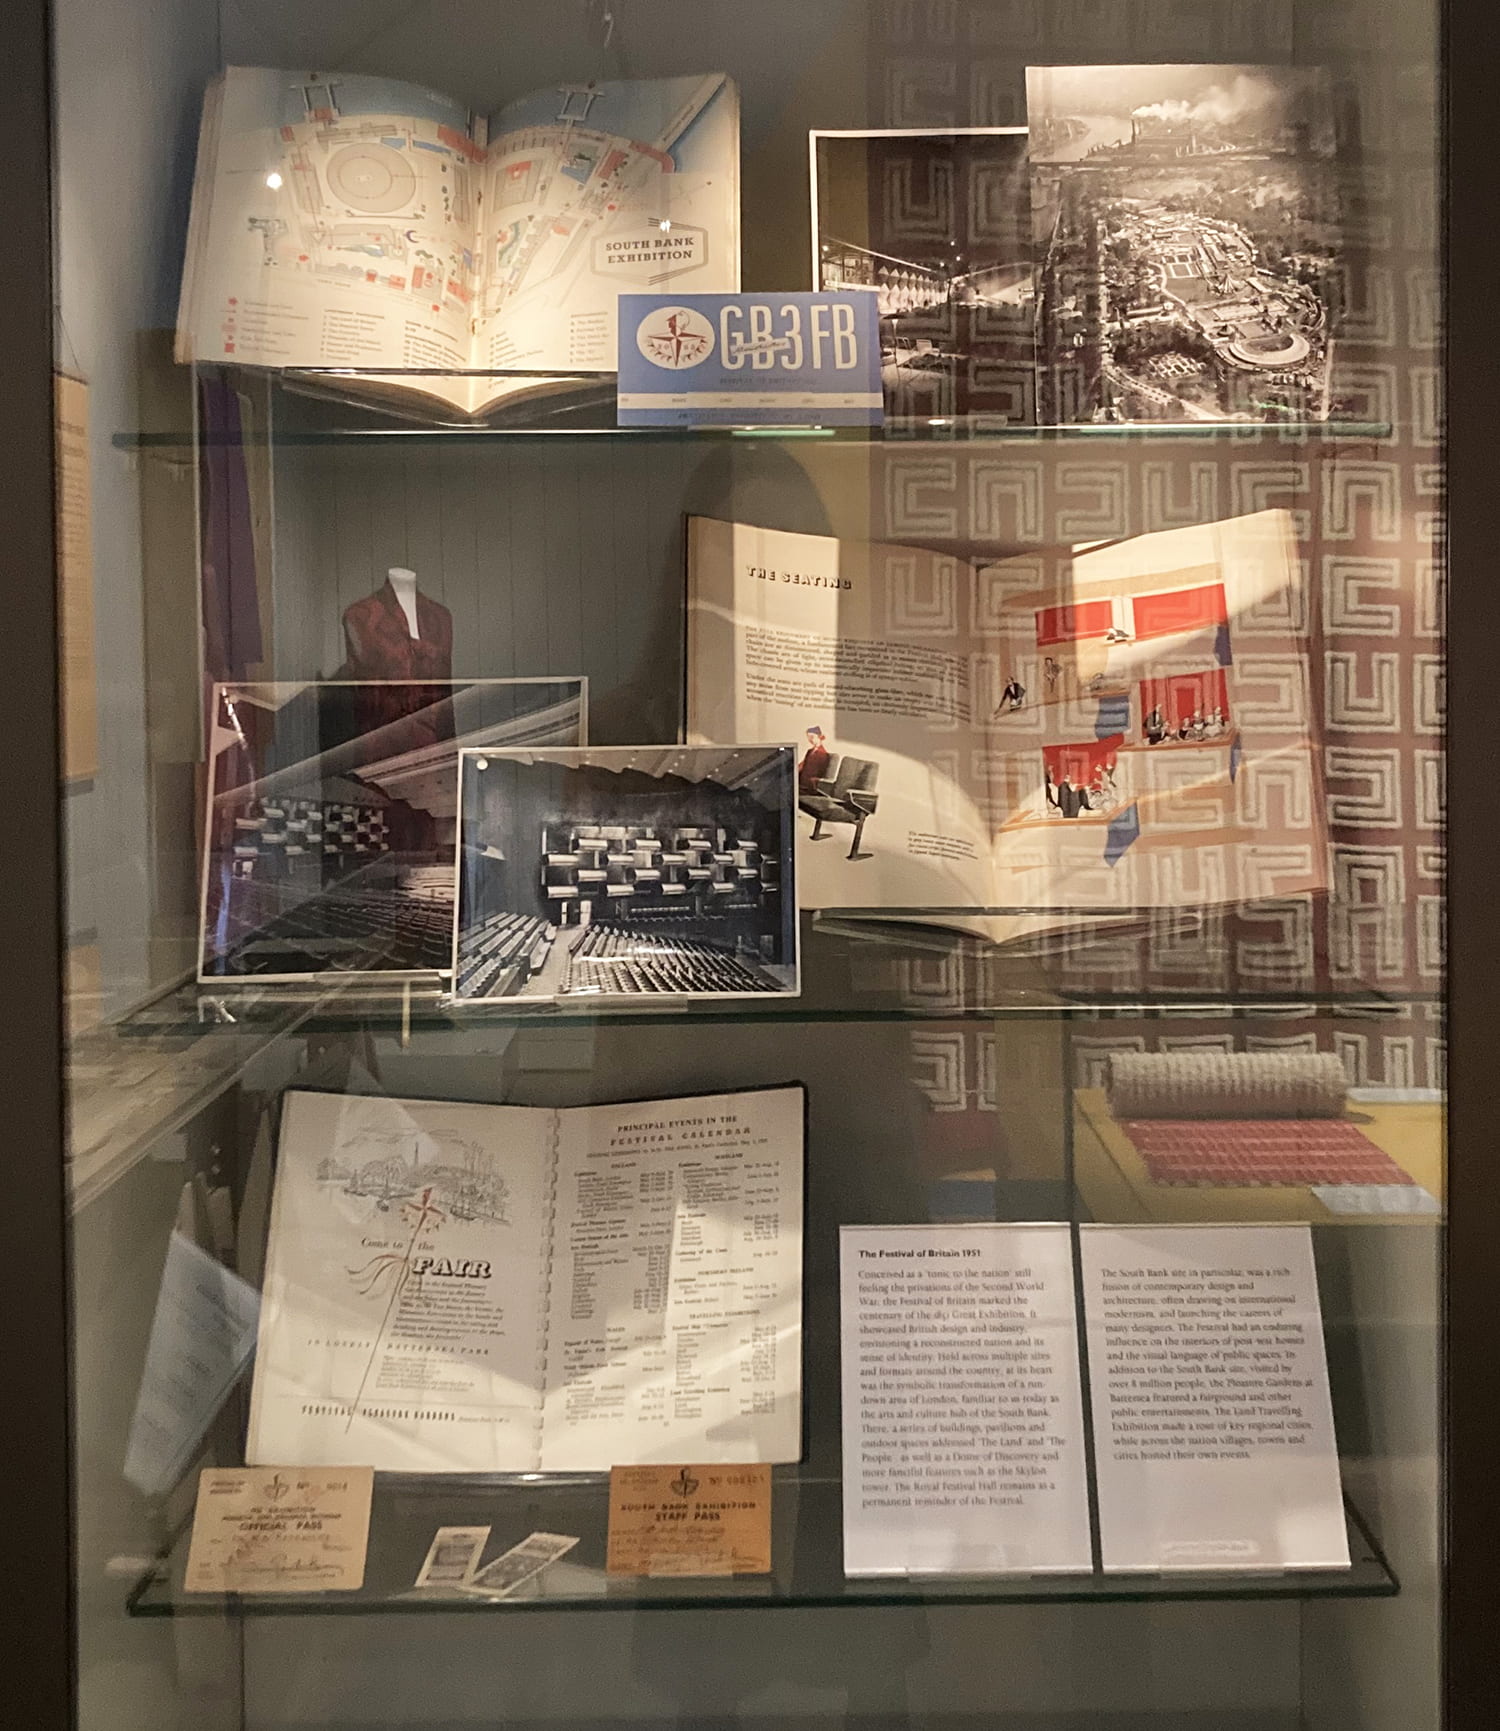 An exhibition display showing archival items relating to the Festival of Britain from the University of Brighton Design Archives